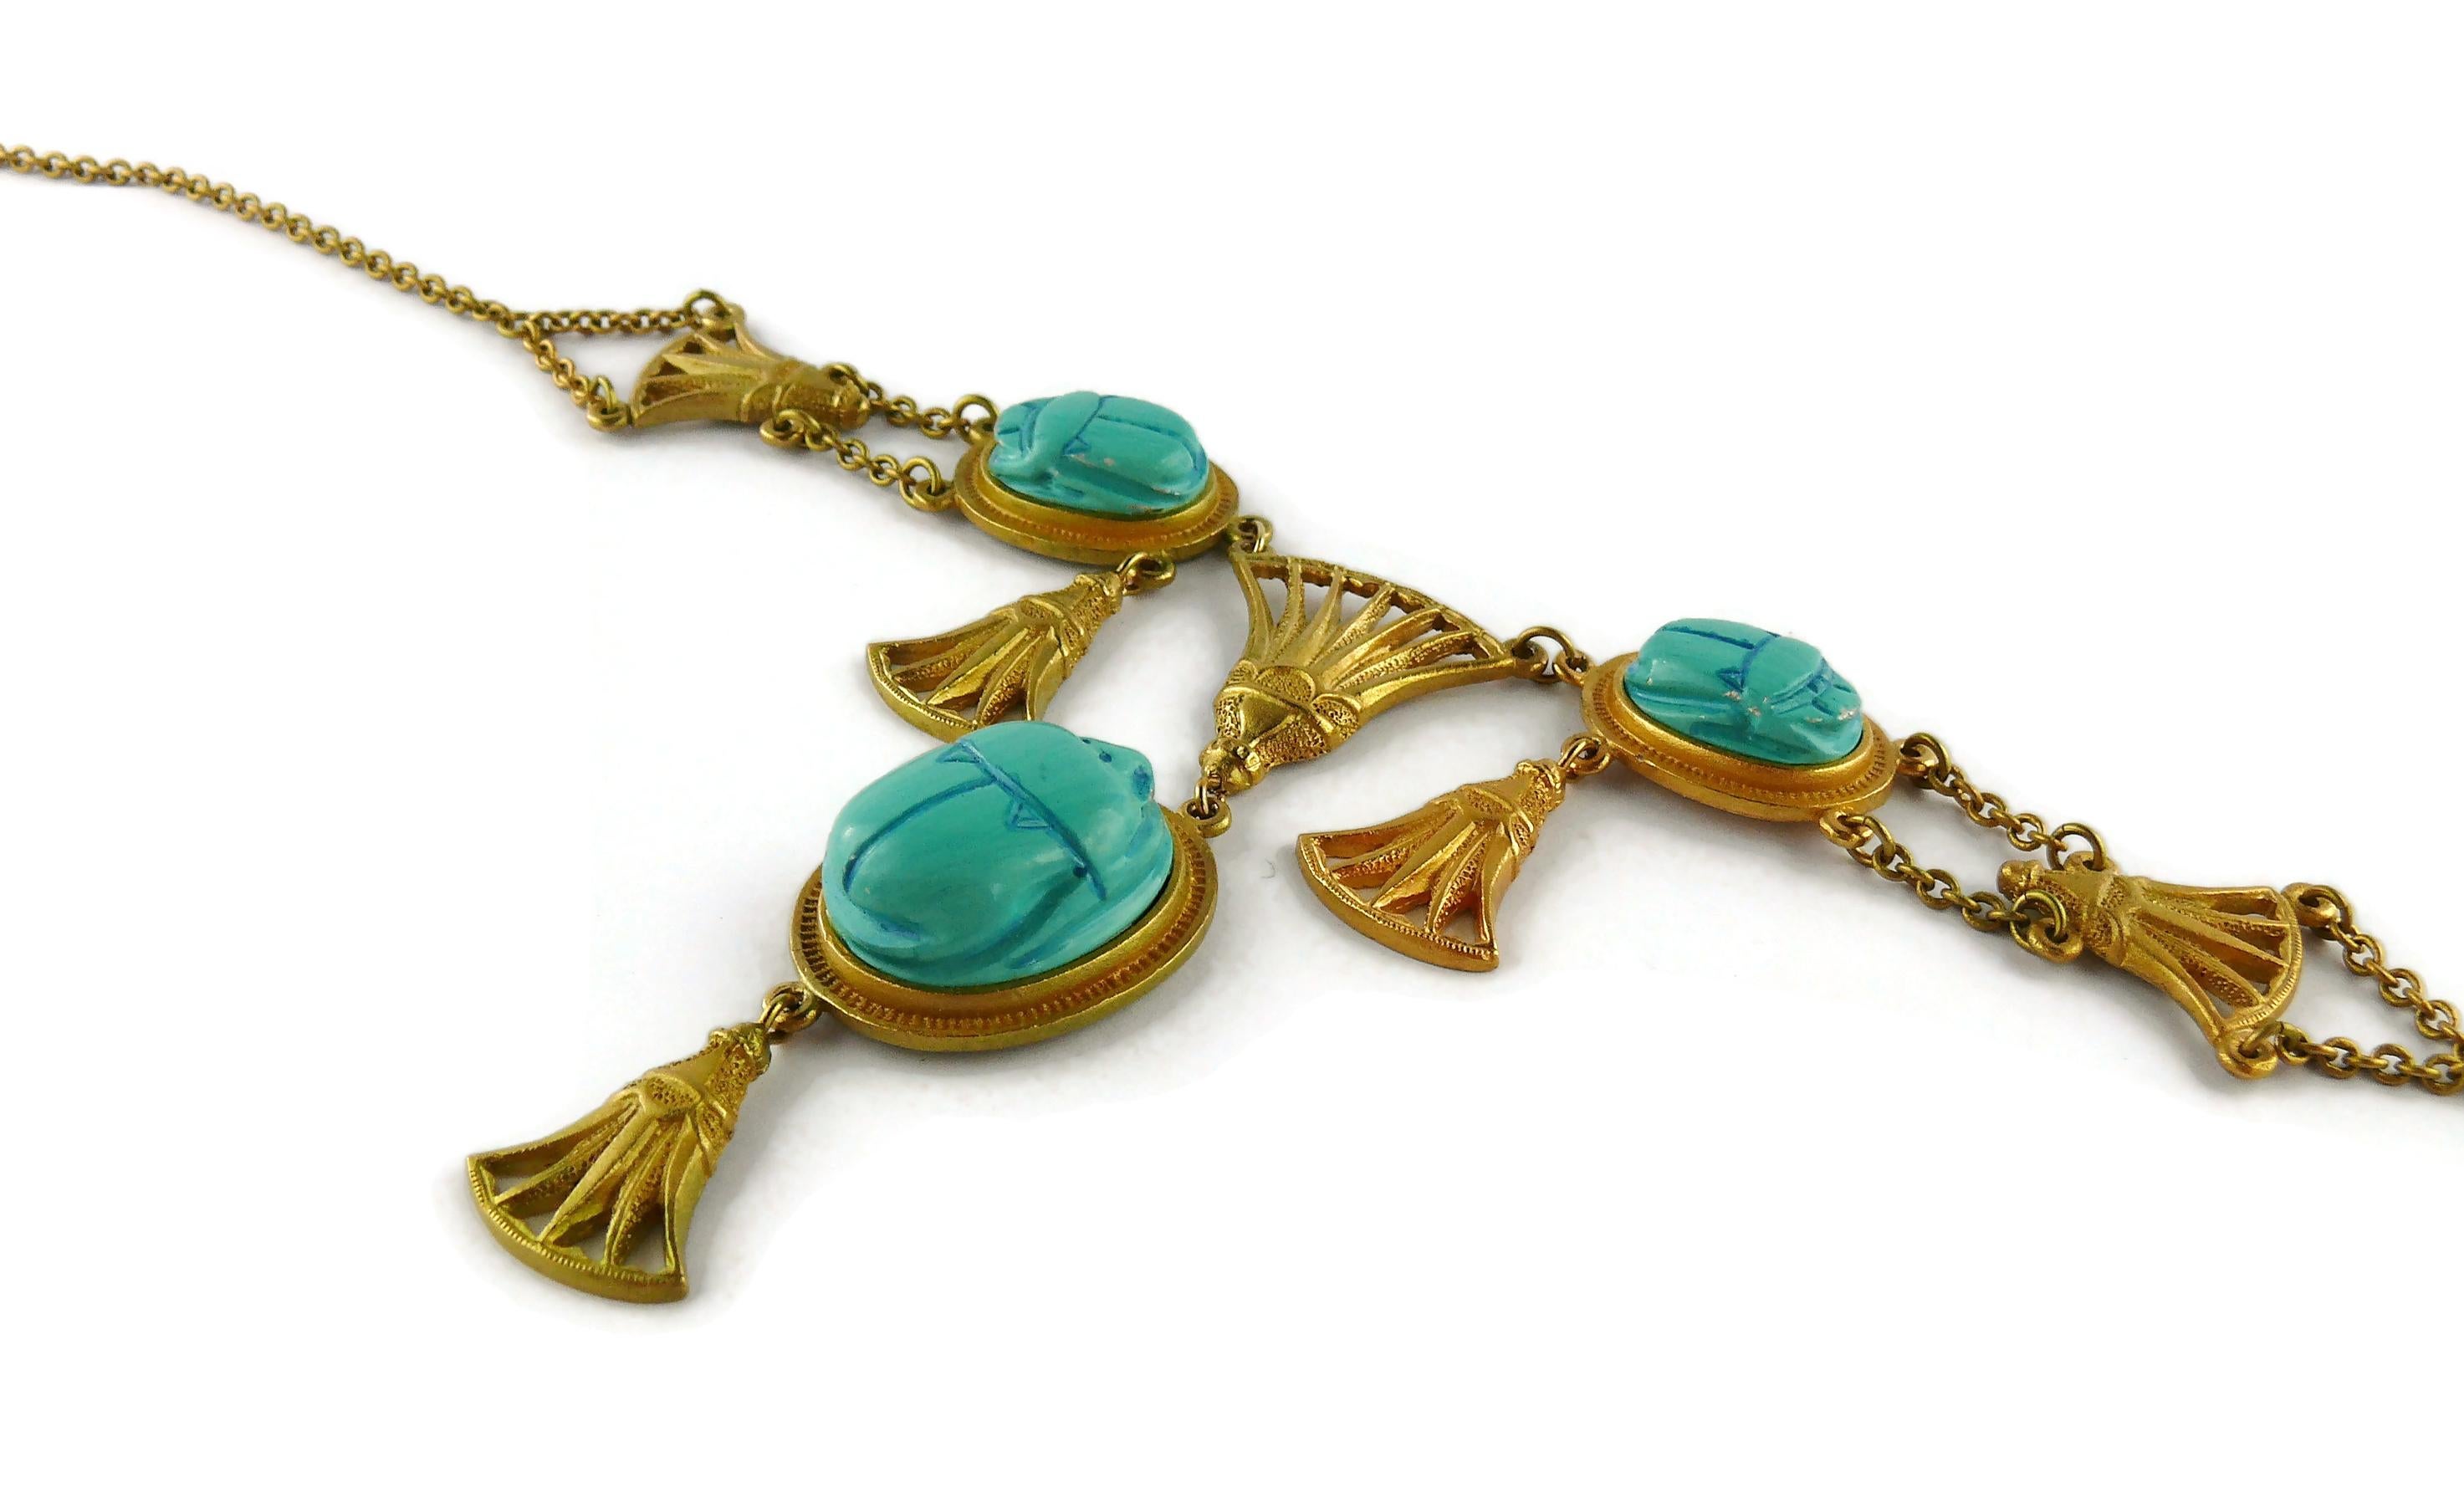 Christian Dior Egyptian Revival Faux Turquoise Scarab Necklace 1